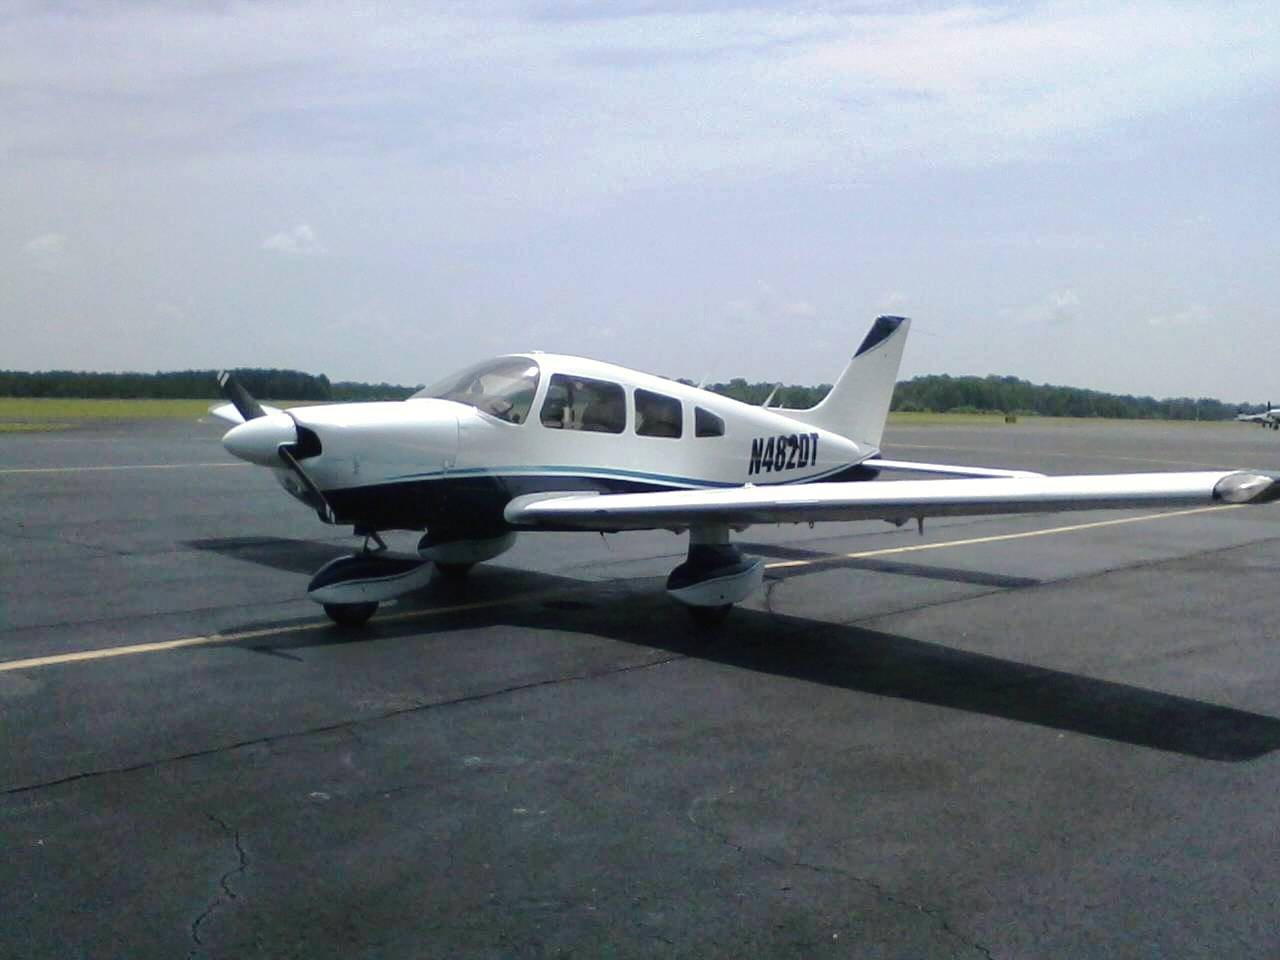 N482DT for Flight Training or Aircraft Rental at Statesboro Bulloch County Airport